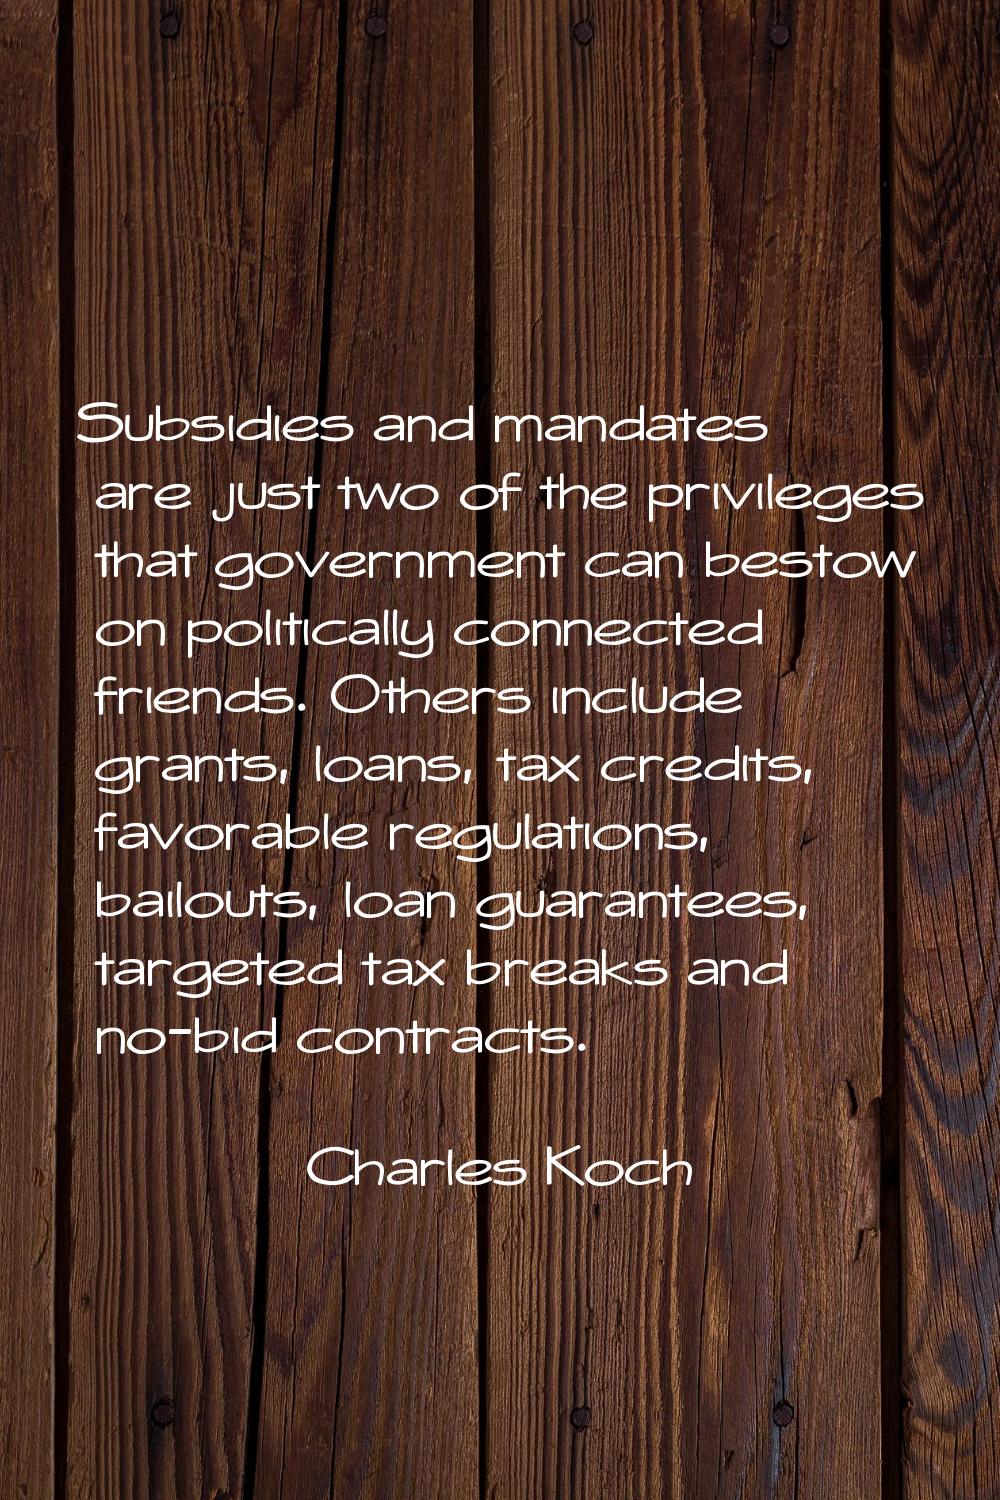 Subsidies and mandates are just two of the privileges that government can bestow on politically con